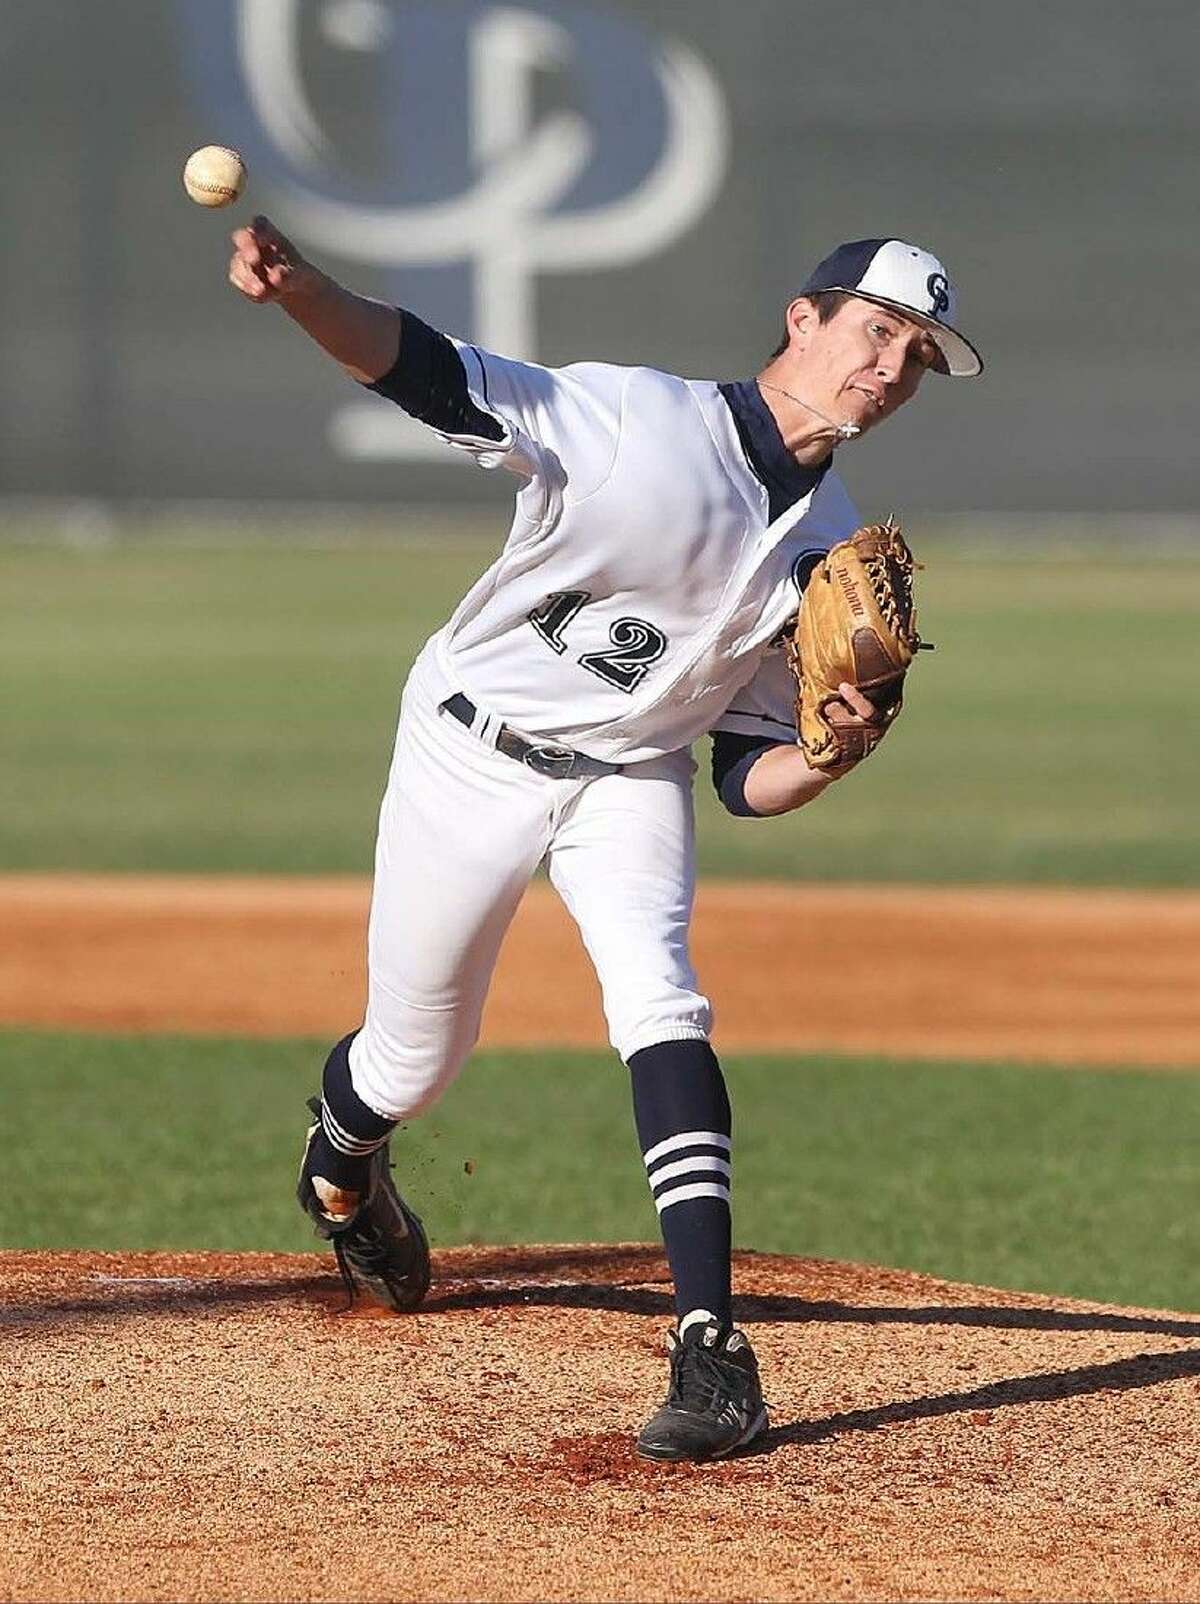 College Park pitcher Beau Ridgeway (12) throws against A&M Consolidated during a high school baseball game last season. To view or purchase this photo and others like it, visit HCNpics.com.